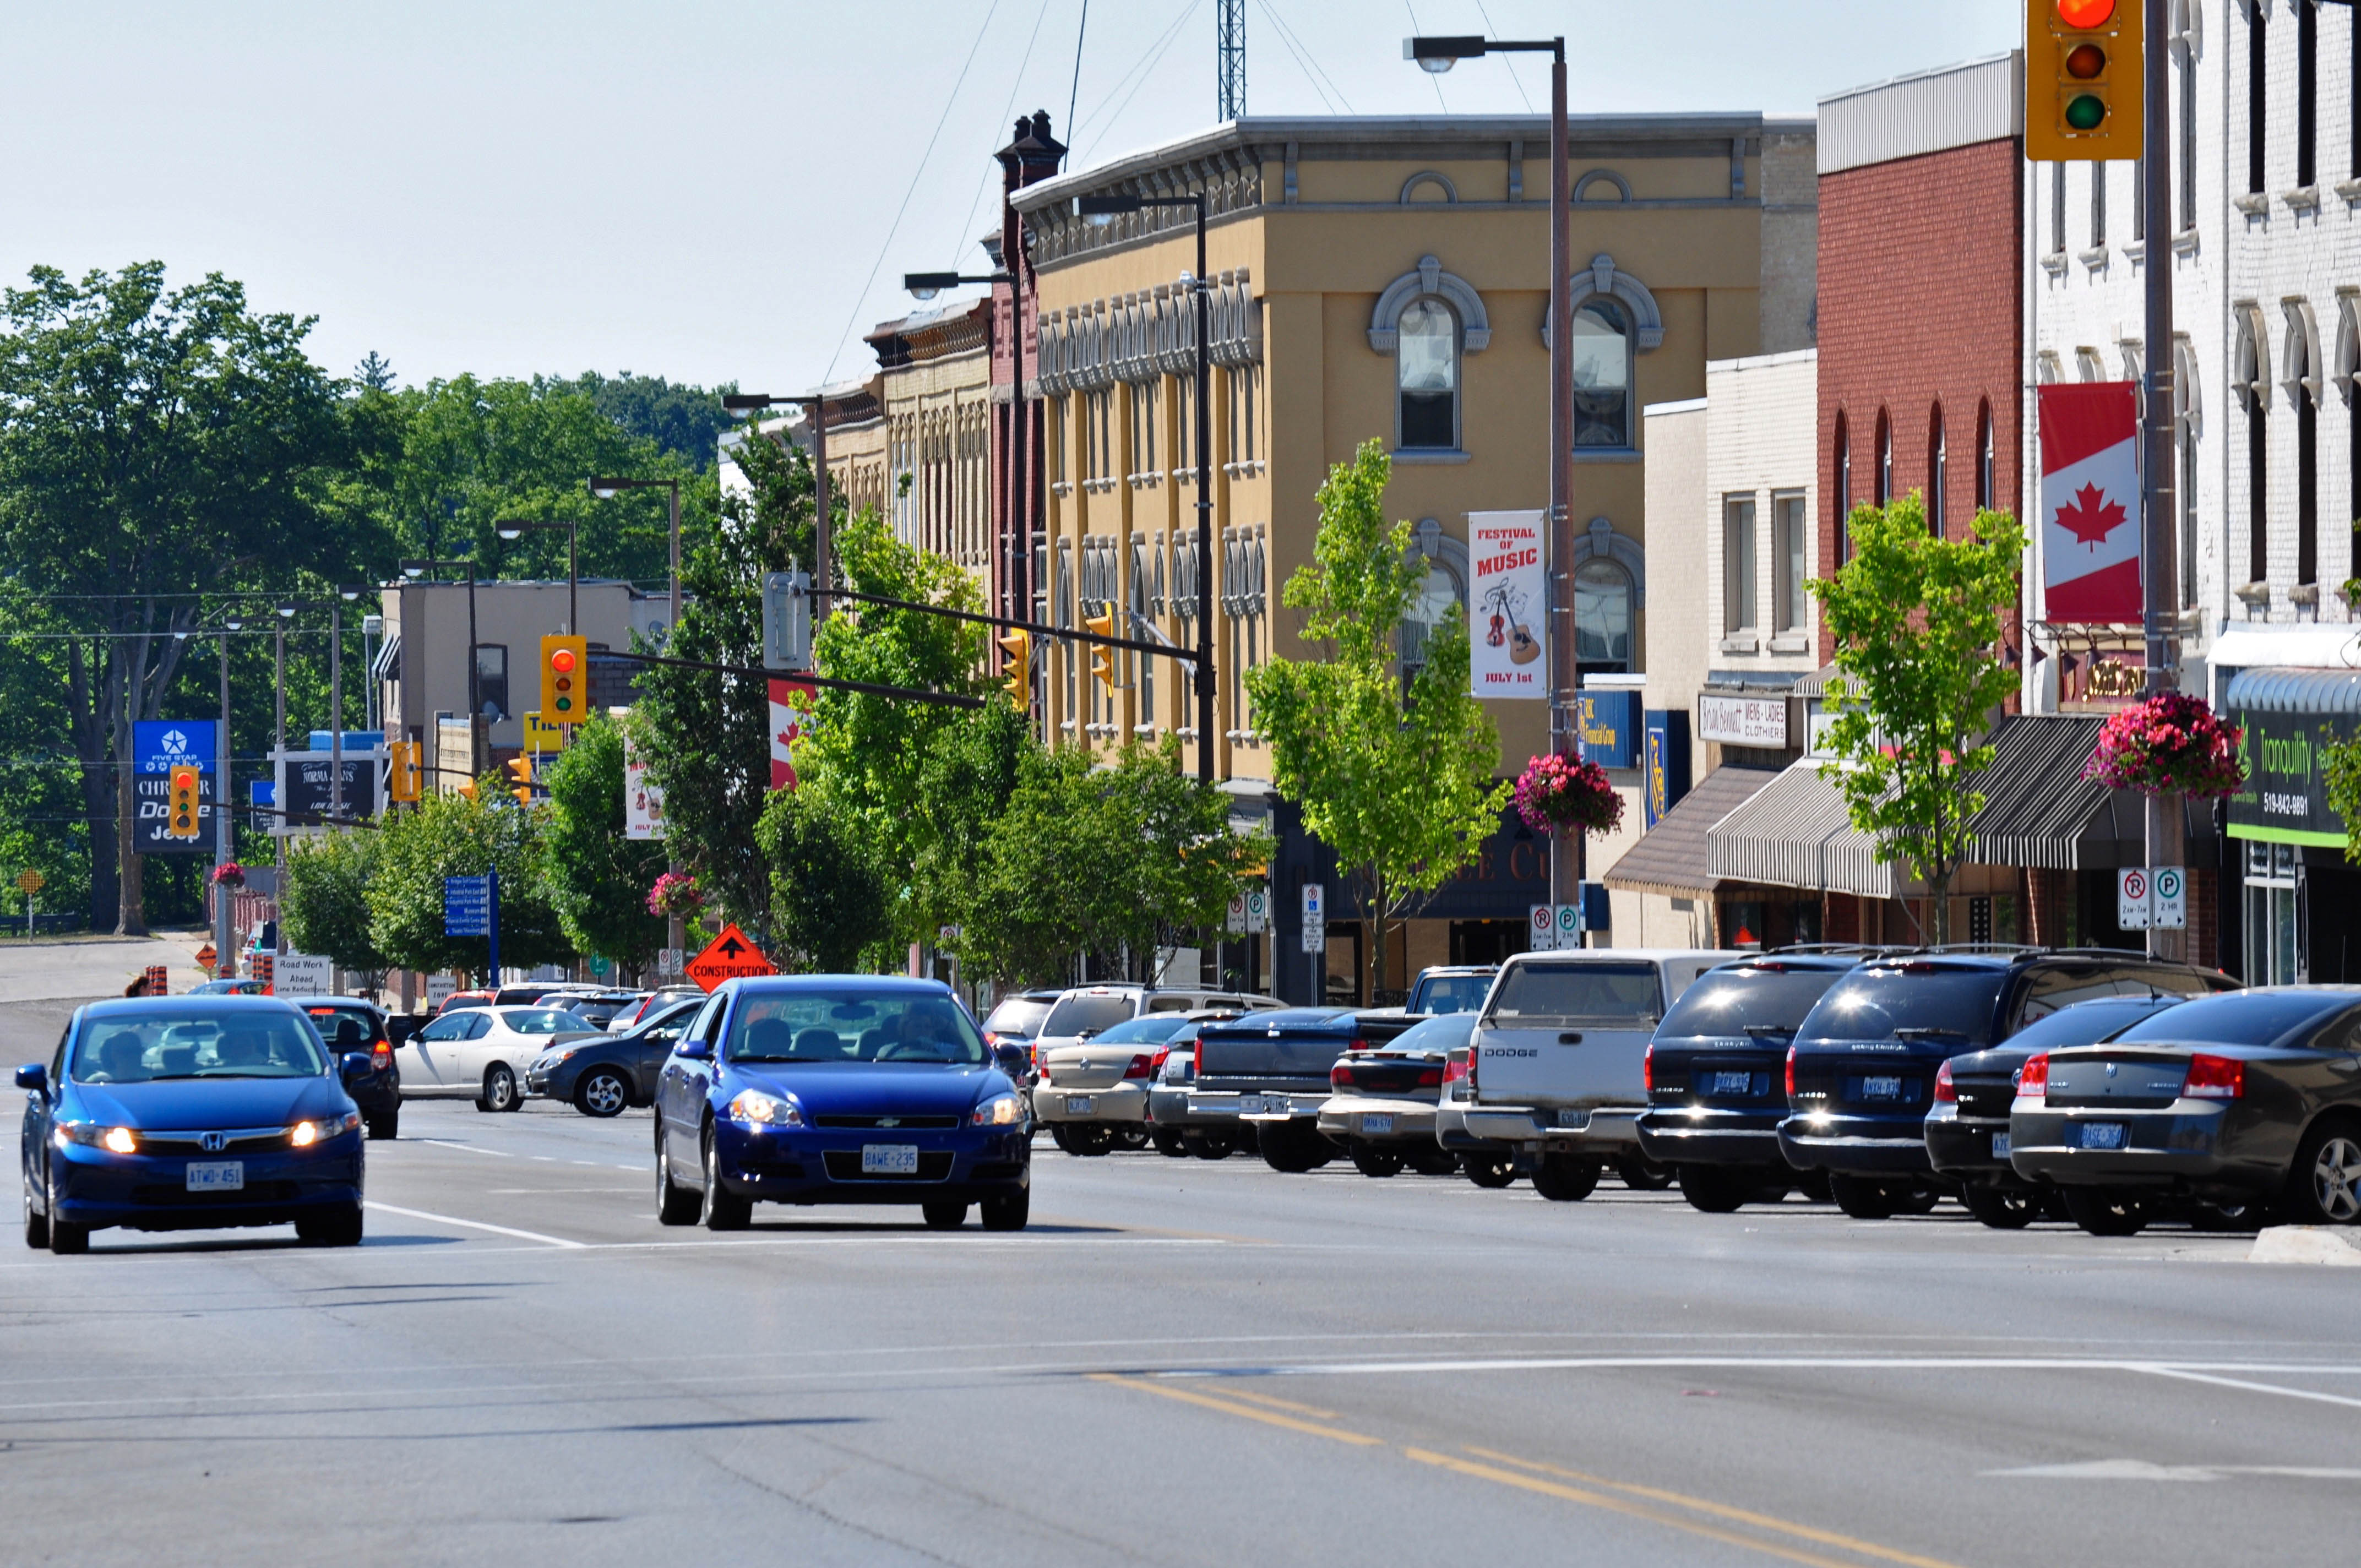 Want to learn about downtown revitalization?